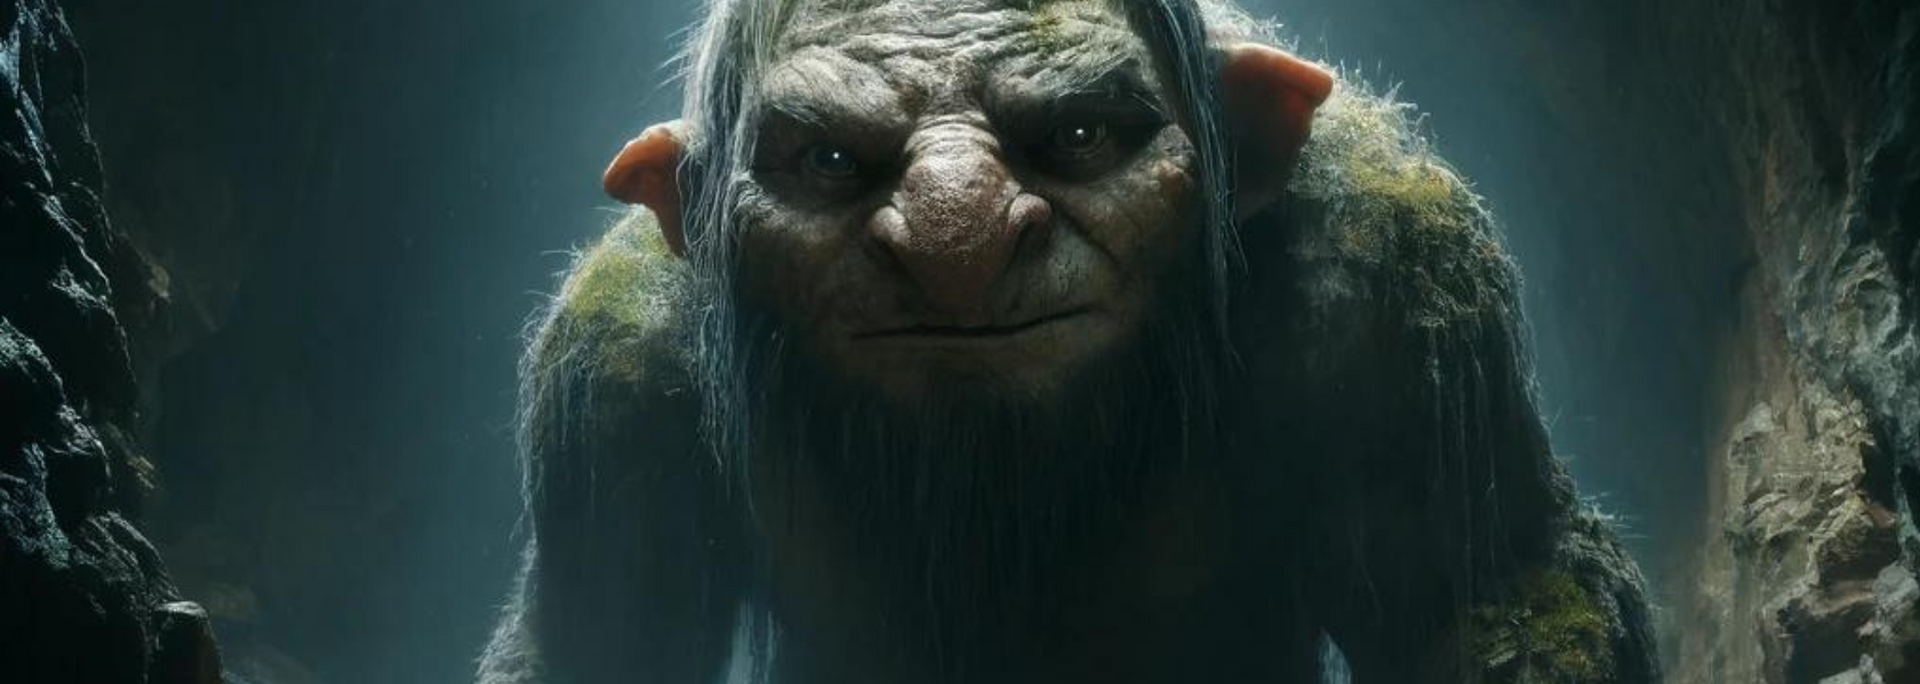 Picture of a troll in a cave.
